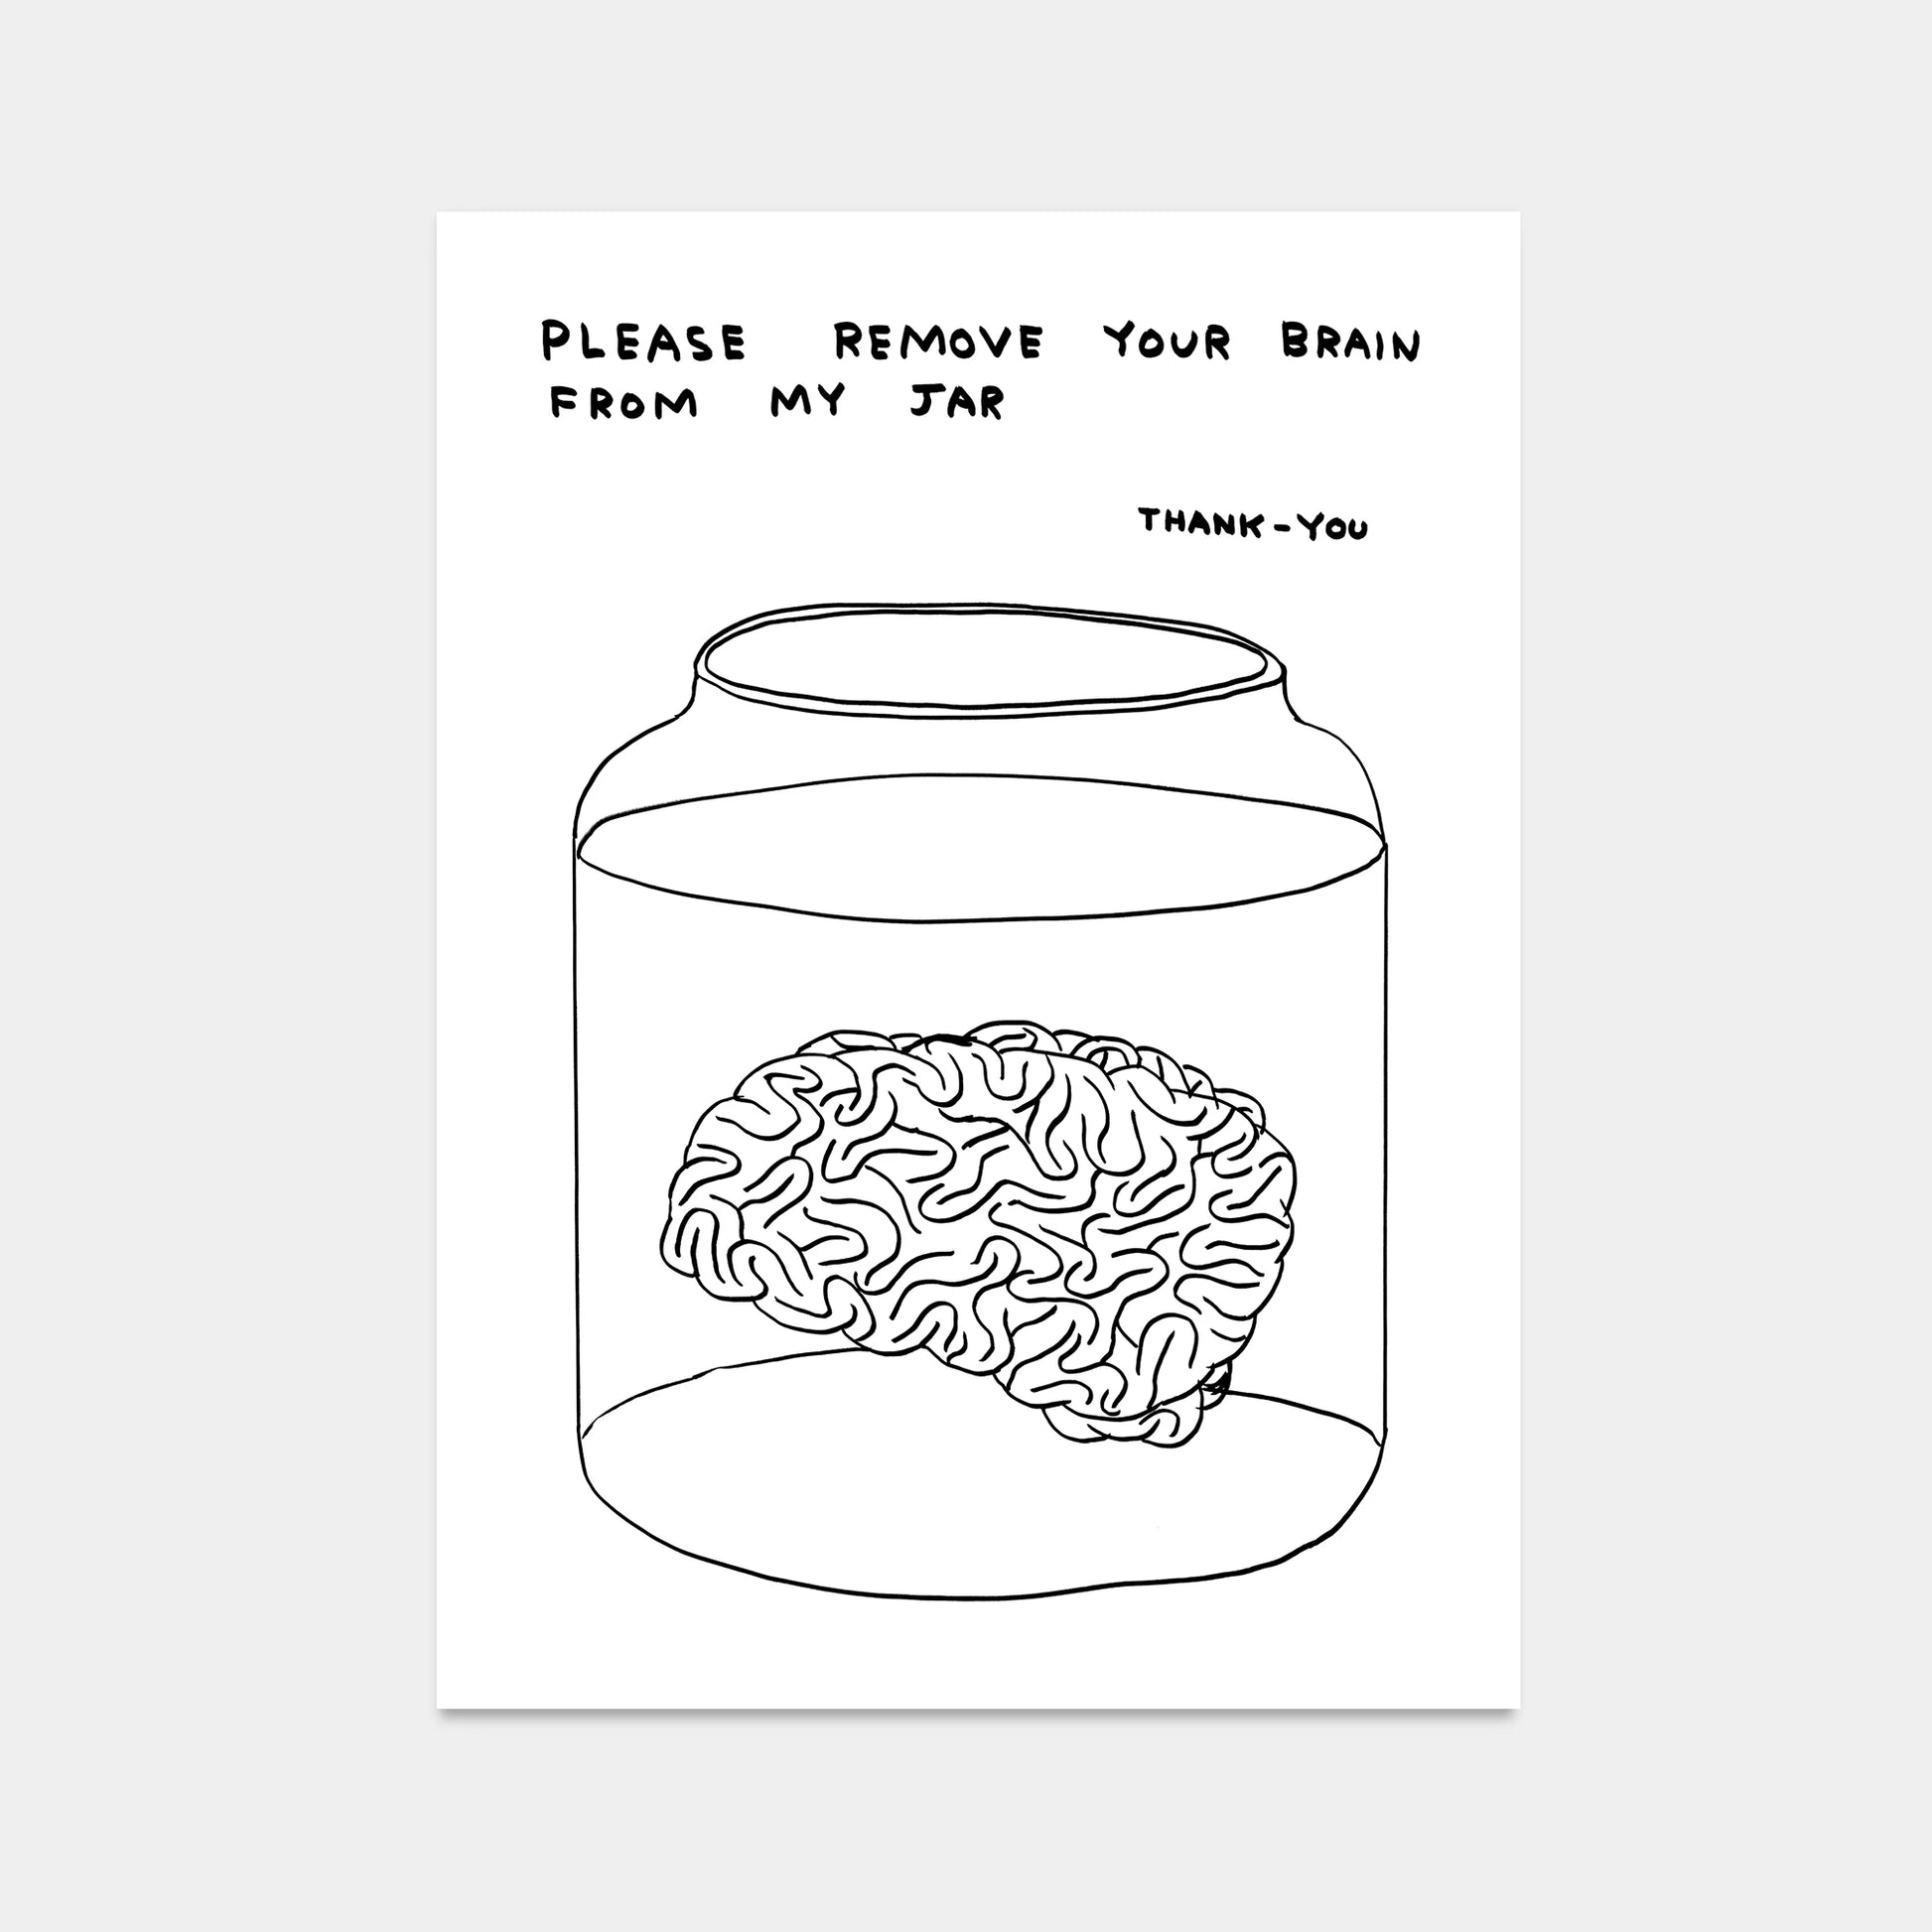 a photo of a david shrigley artwork titled 'please remove your brain from my jar'. the artwork features a white background, with a black line drawing of a brain in a jar of liquid, with text above stating 'please remove your brain from my jar tjank-you' in all caps. this is a david shrigley print for sale